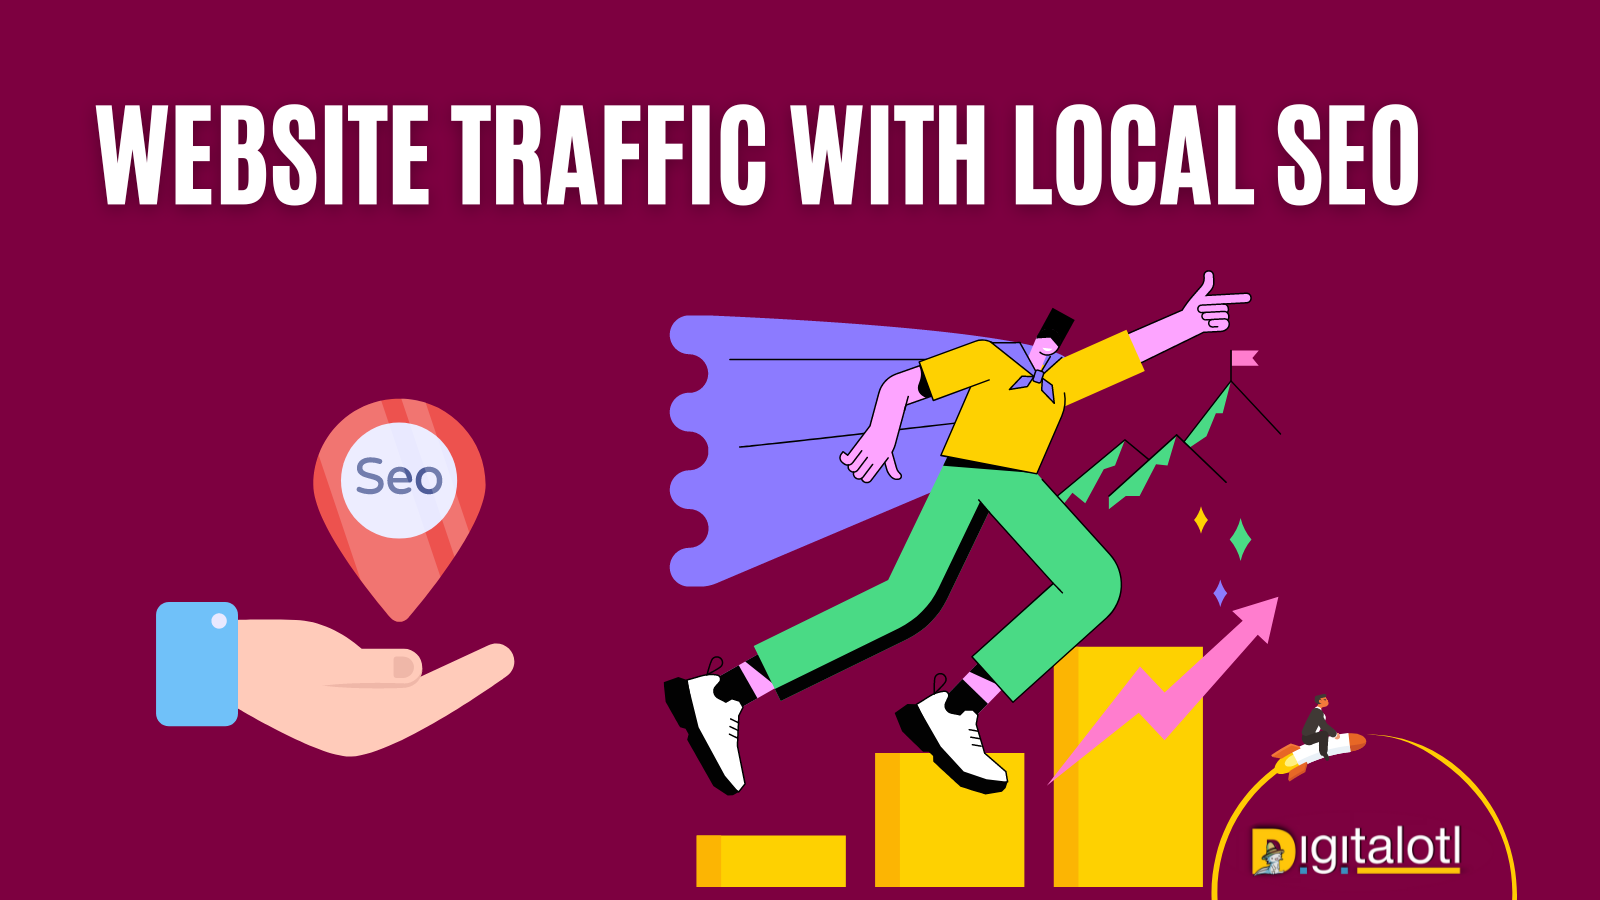 Website Traffic with Local SEO strategies